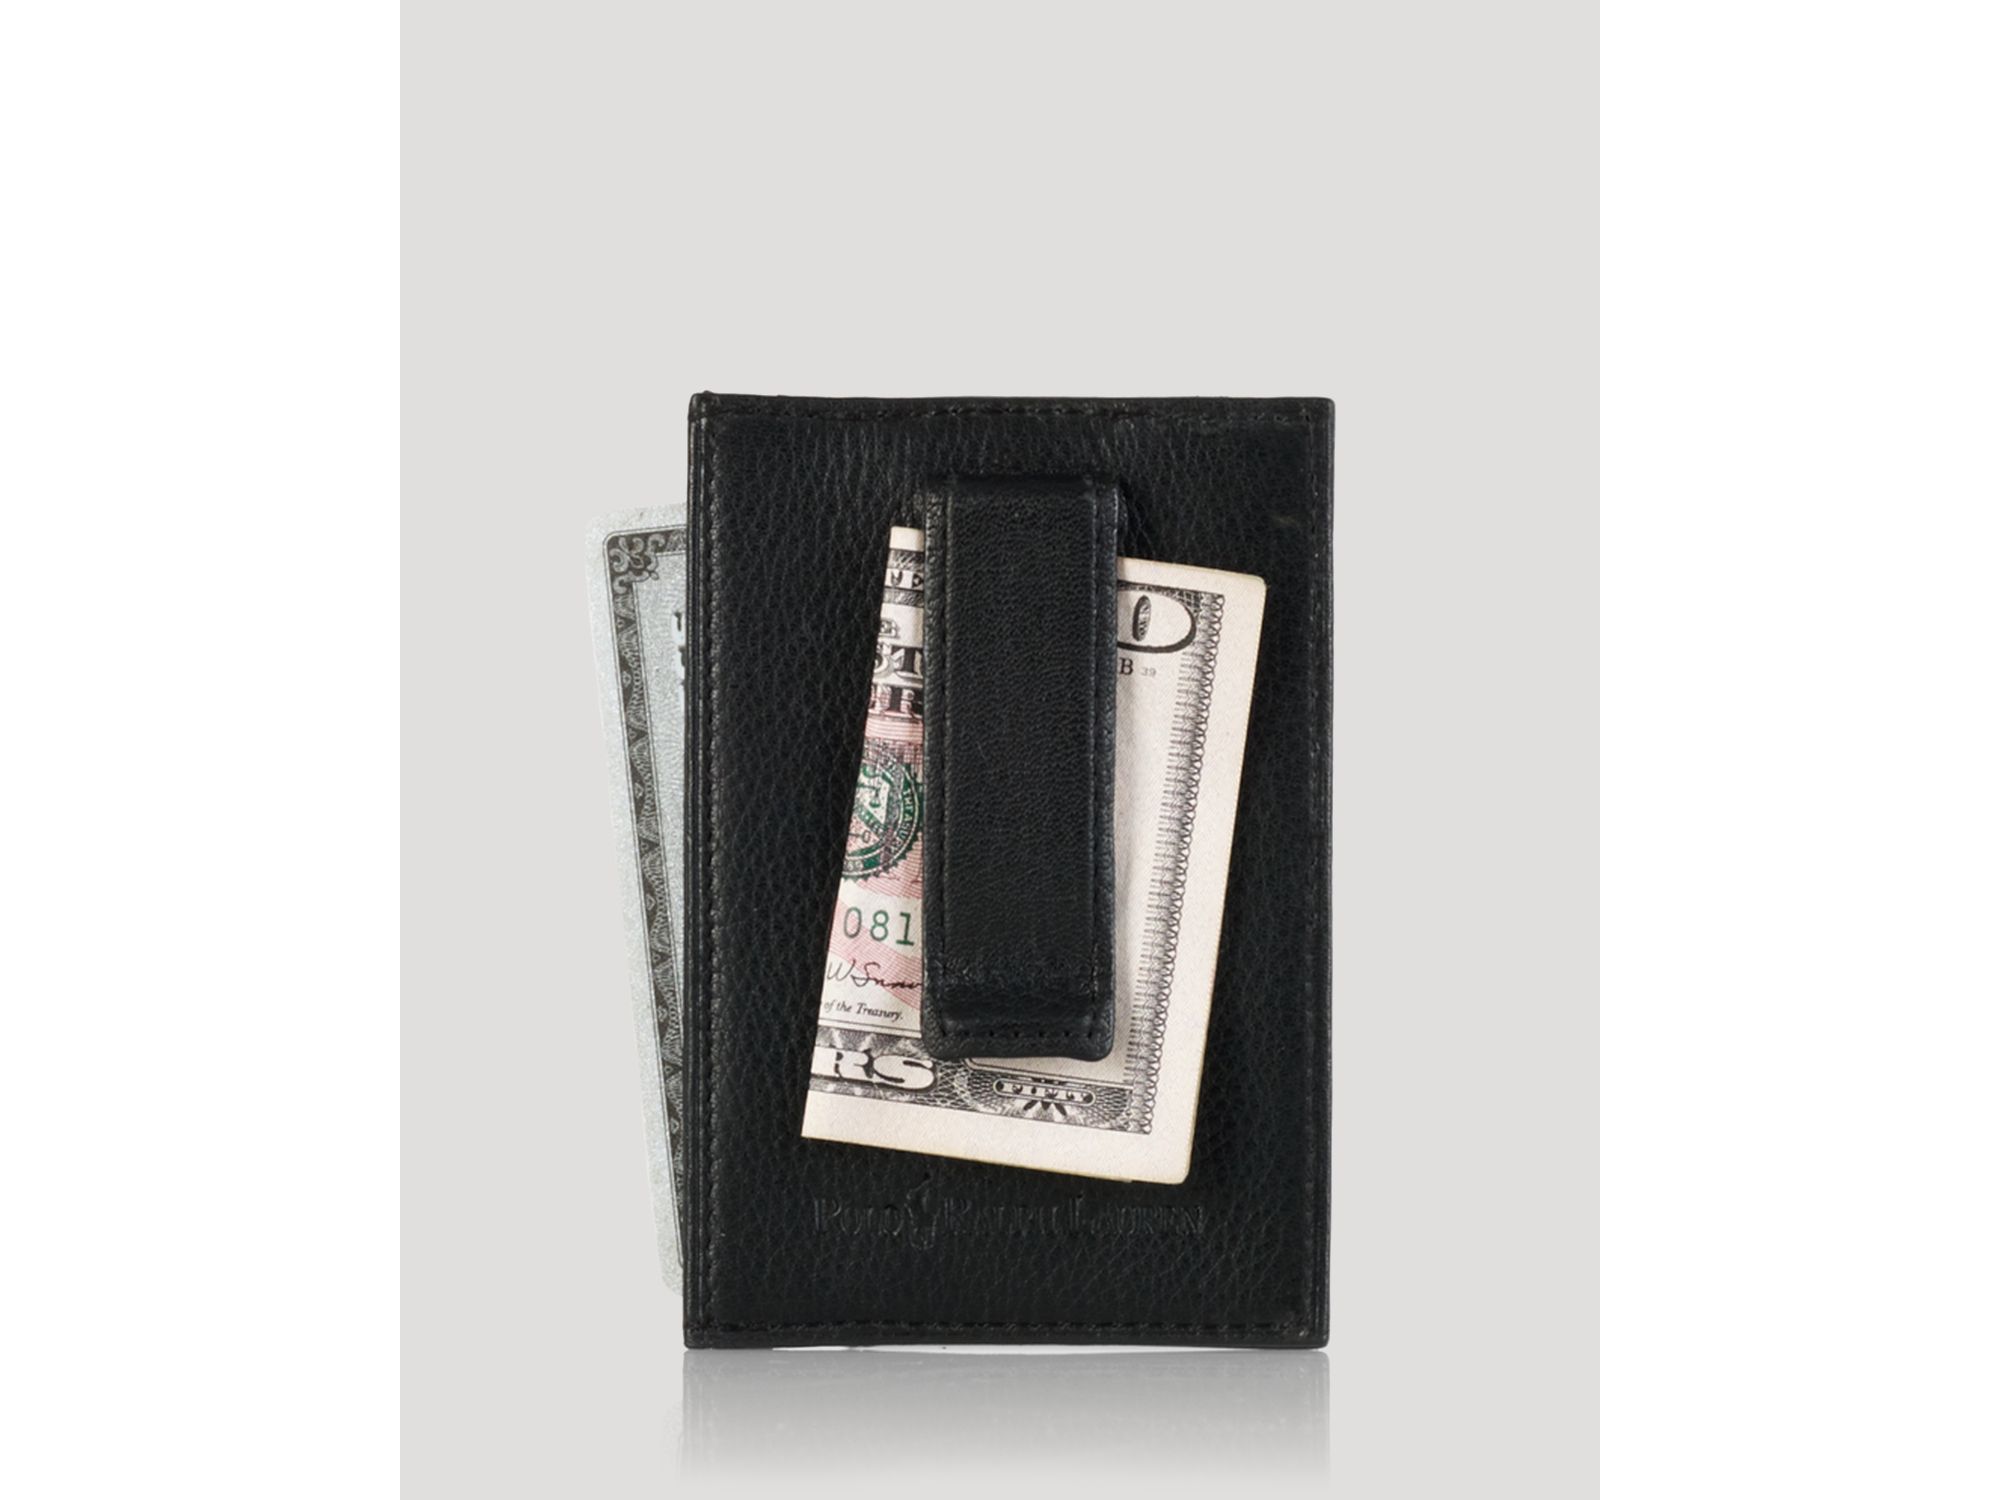 Ralph Lauren Polo Burnished Leather Card Case with Money Clip in Black ...